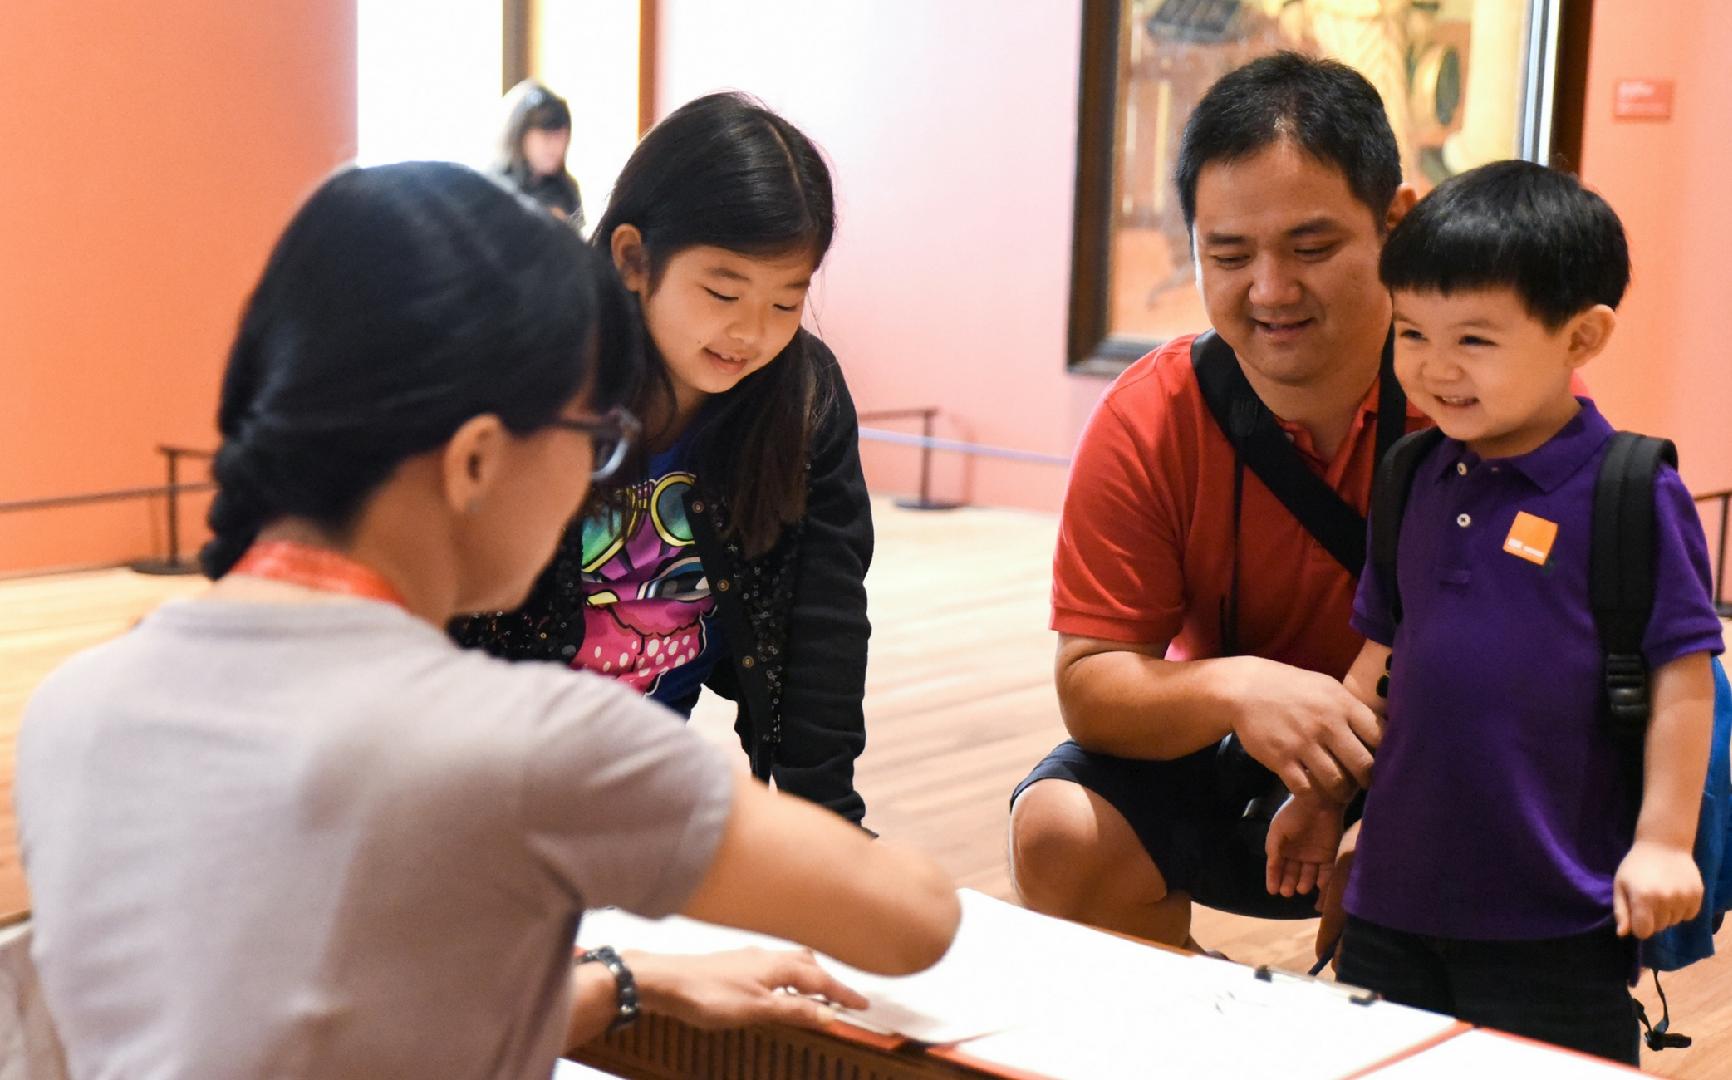  Explore how Singapore artists depict movement in their art through discussion and sketching in this docent-led programme. Ages 5 and above. 